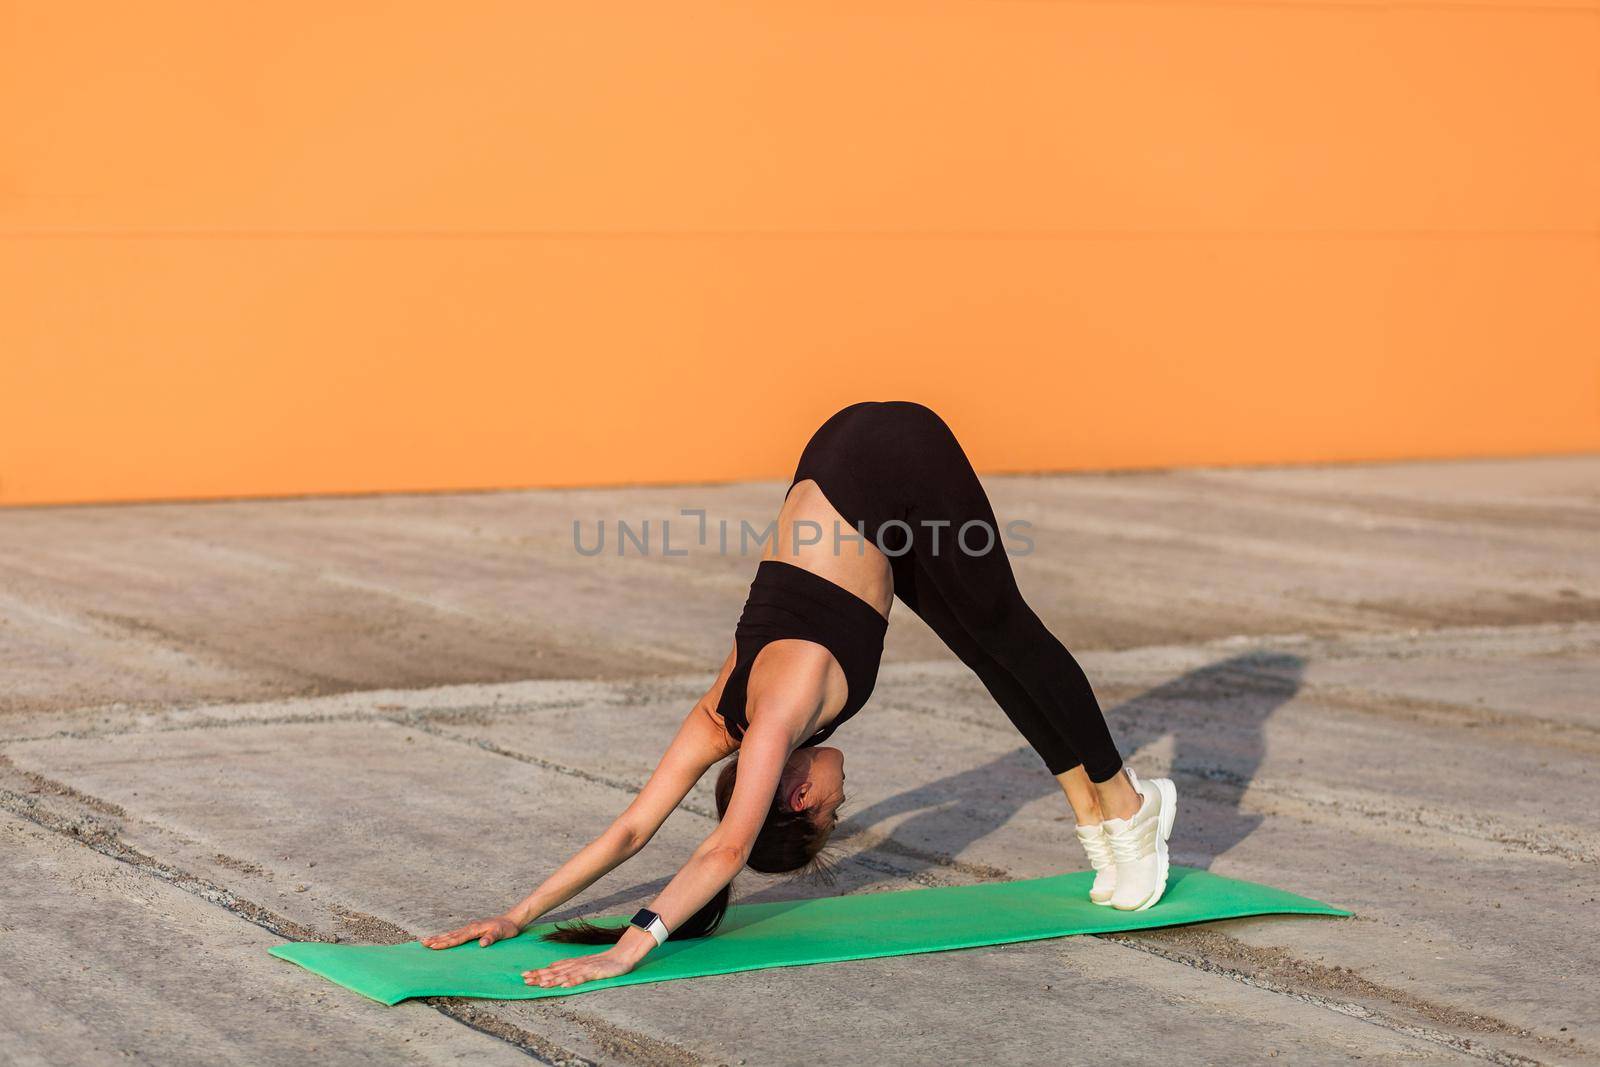 Slim athletic woman in tight sportswear, black pants and top, practicing yoga, standing downward facing dog pose, stretching body muscles, flexibility training. Health care, sport activity outdoor